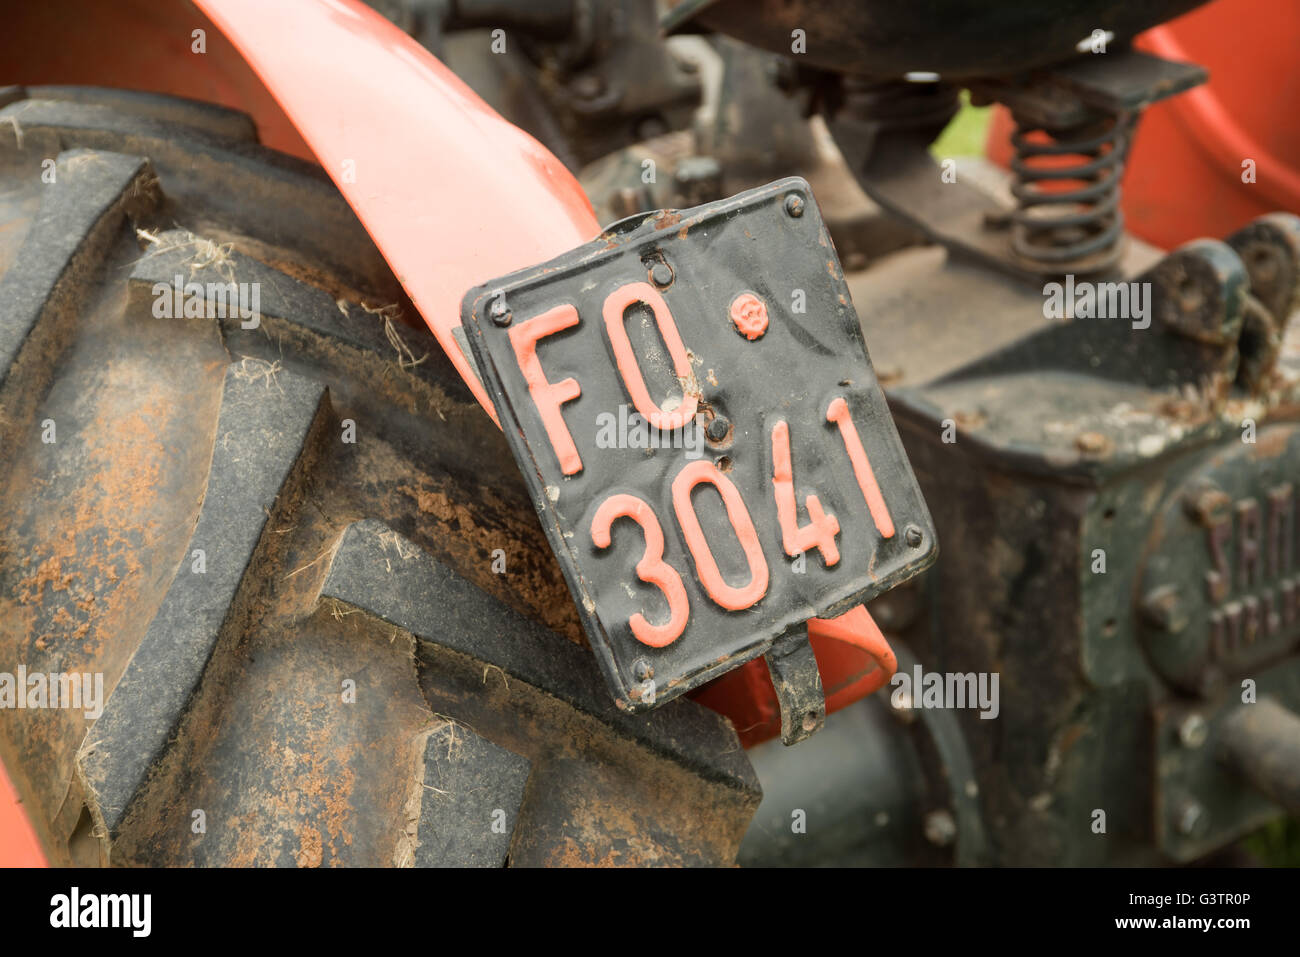 Italian Tractor Registration Number Plate Stock Photo - Alamy